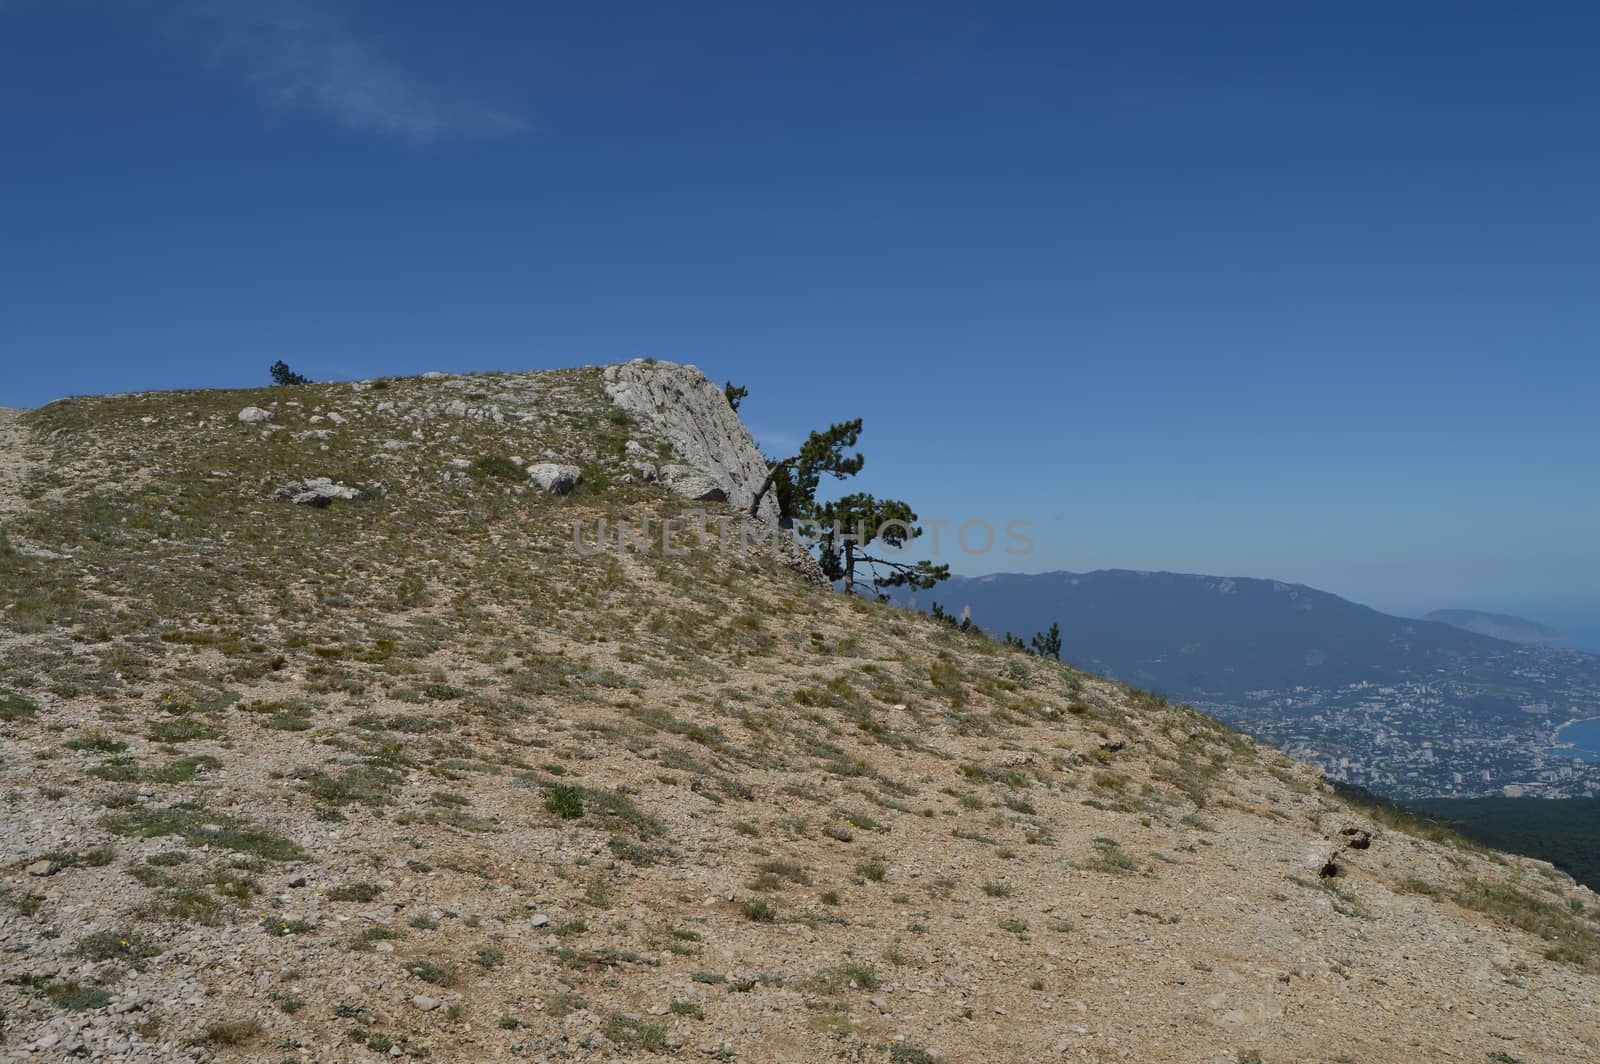 A lonely pine tree with a curving trunk on a mountainside, against a blue sky.